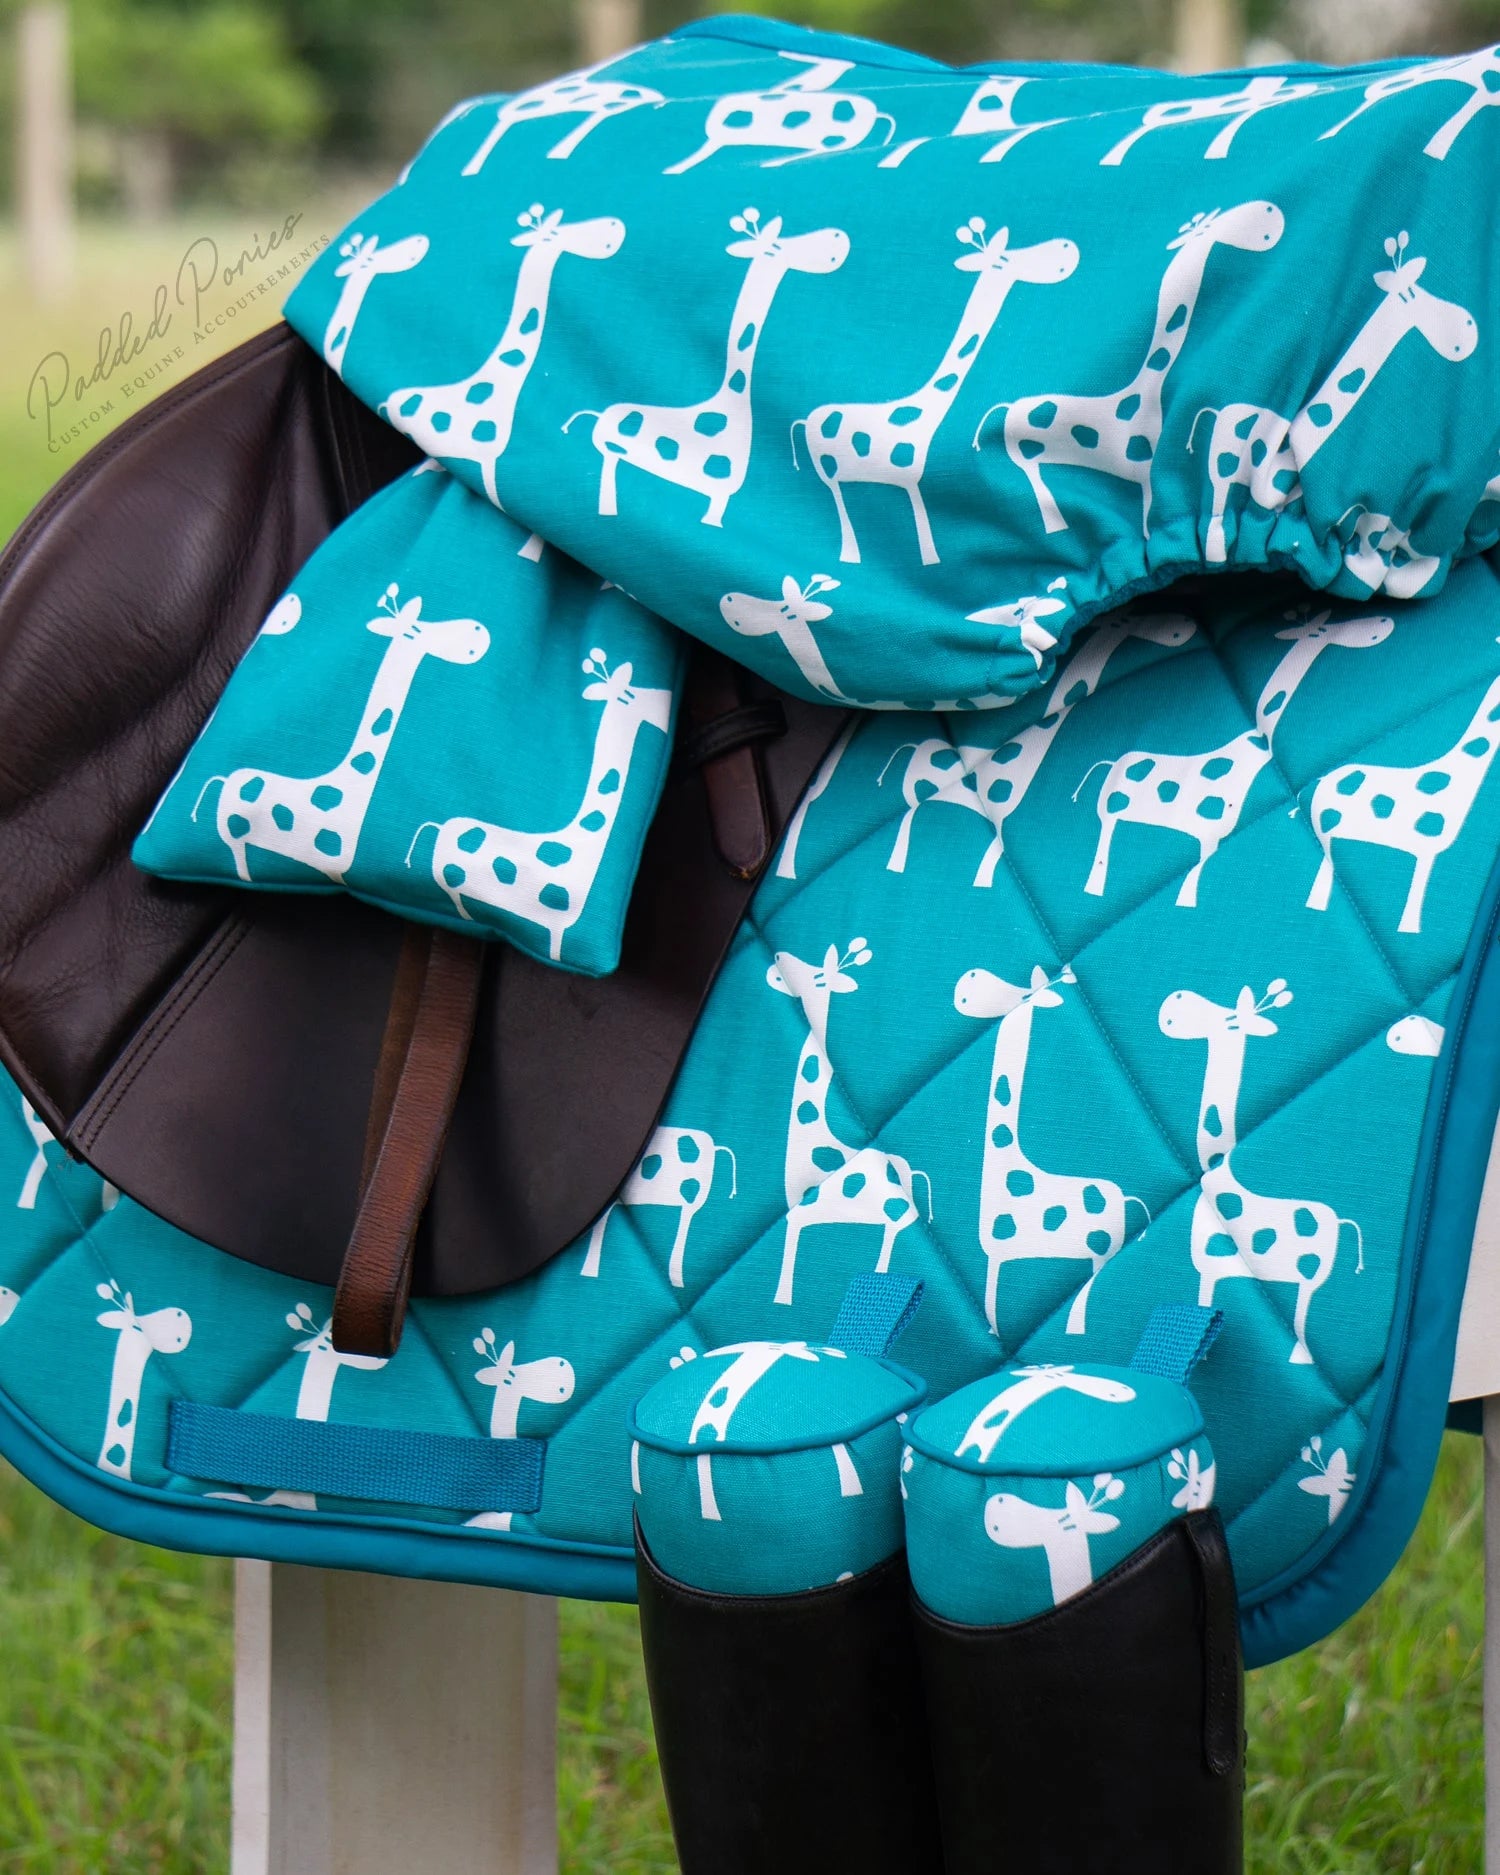 Turquoise Teal Giraffes Animal Print All Purpose Saddle Cover with Matching Set